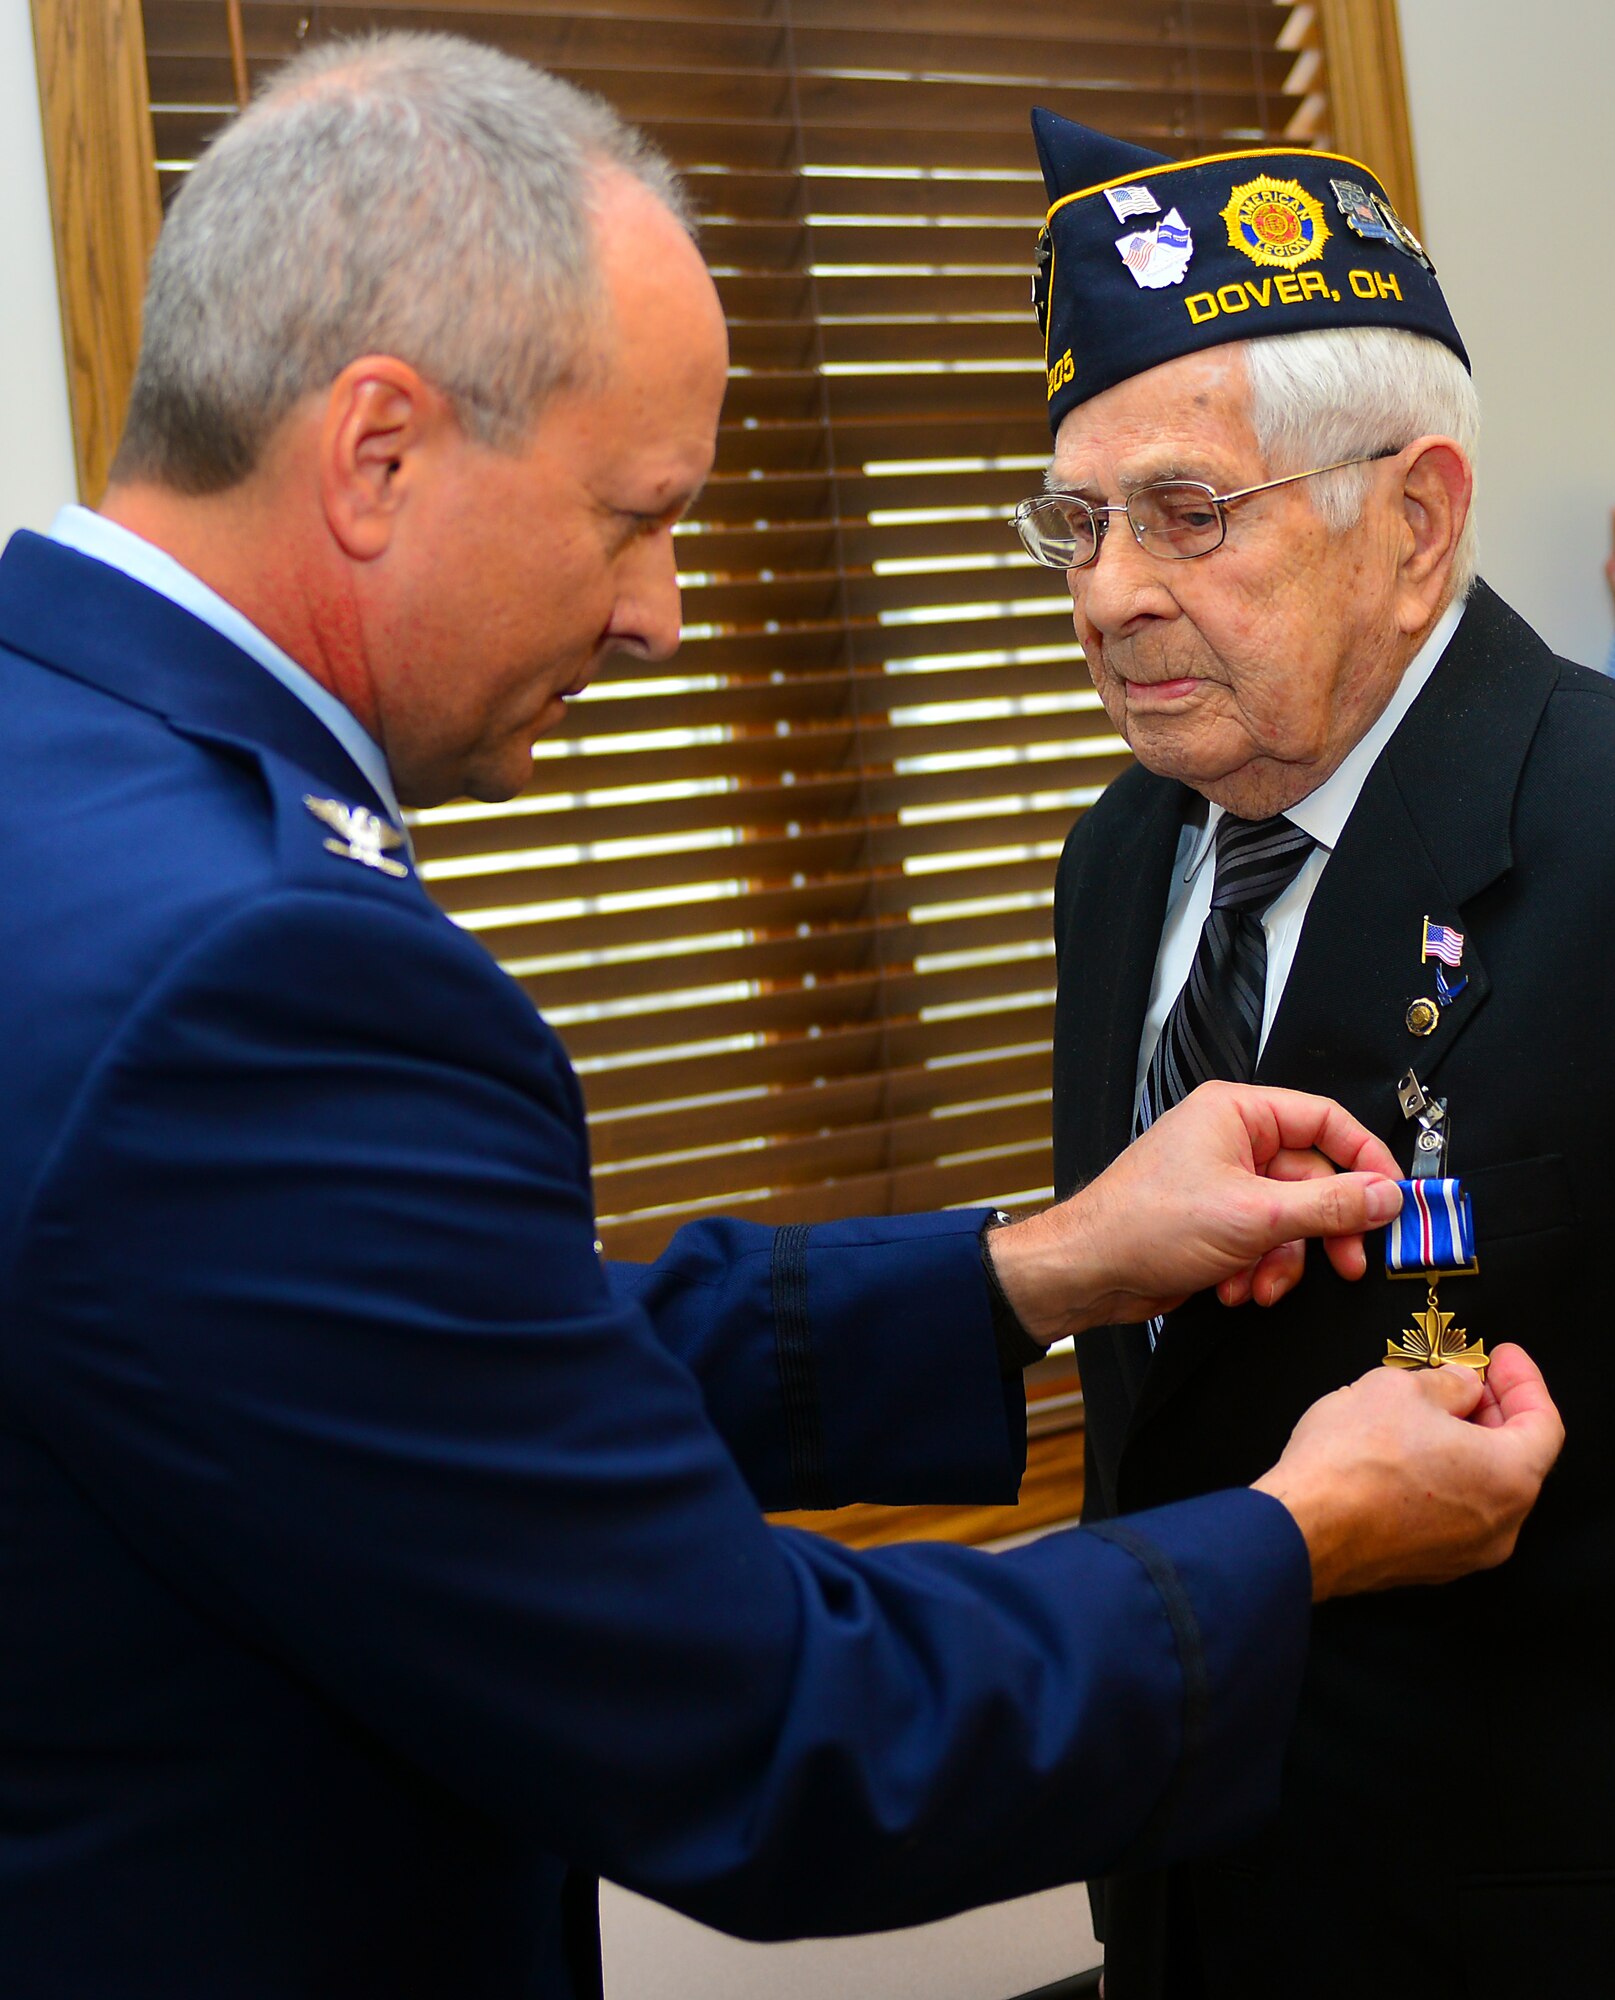 U.S. Air Force Col. Jim Jones, 121st Air Refueling Wing Commander, presents retired Staff Sgt. Jesse Reese with the Distinguished Flying Cross medal Jan. 16, 2015, in Dover, Ohio. Reese earned the medal on Dec. 31, 1944,  as a tail gunner over the skies of Hamburg, Germany. (U.S. Air National Guard photo by Master Sgt. Ralph Branson/Released)
